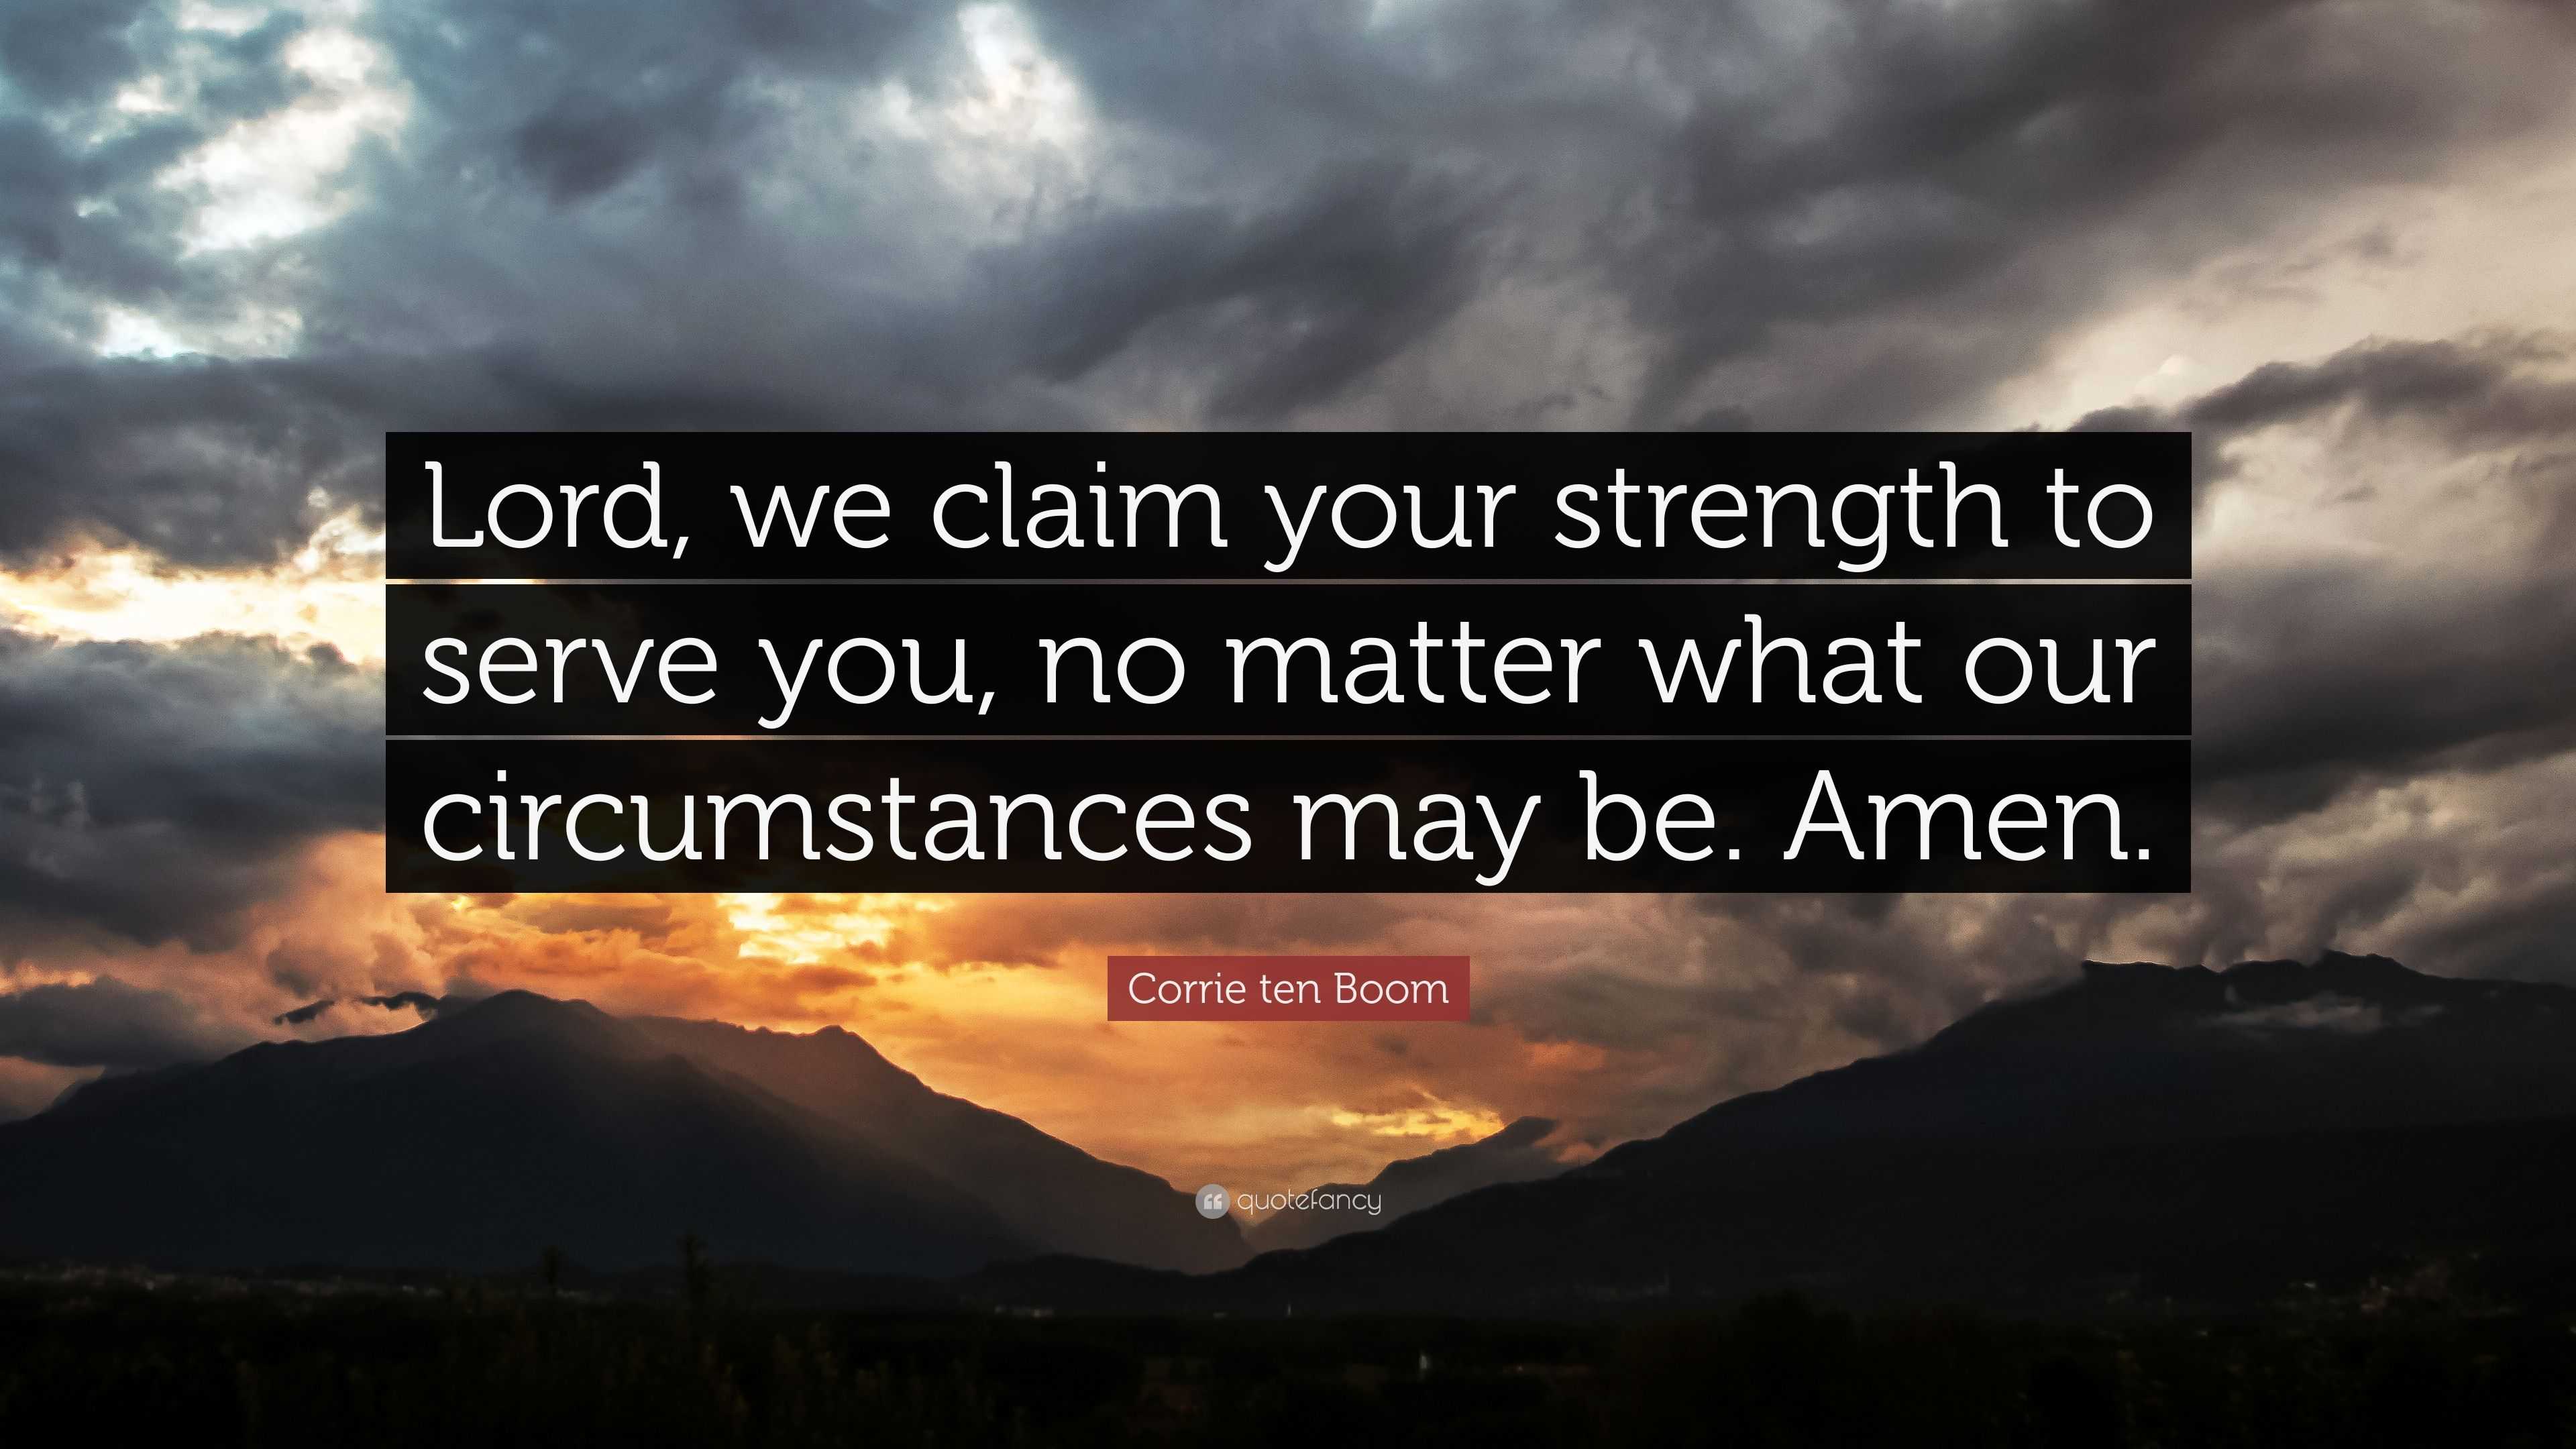 Corrie ten Boom Quote: “Lord, we claim your strength to serve you, no ...